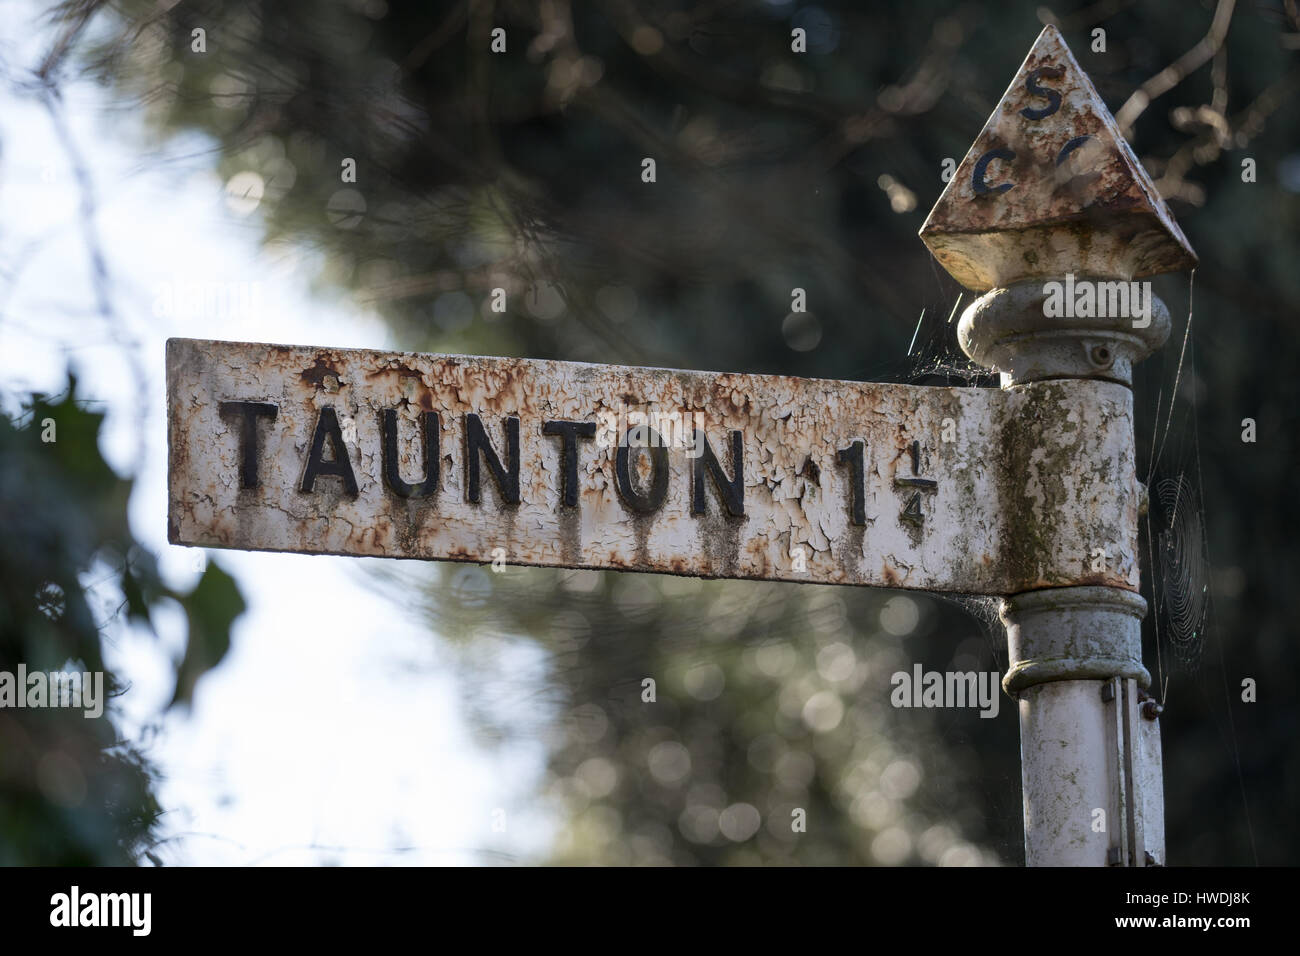 A road sign indicating the direction to the town of Taunton and the distance of one and a quarter miles. Stock Photo